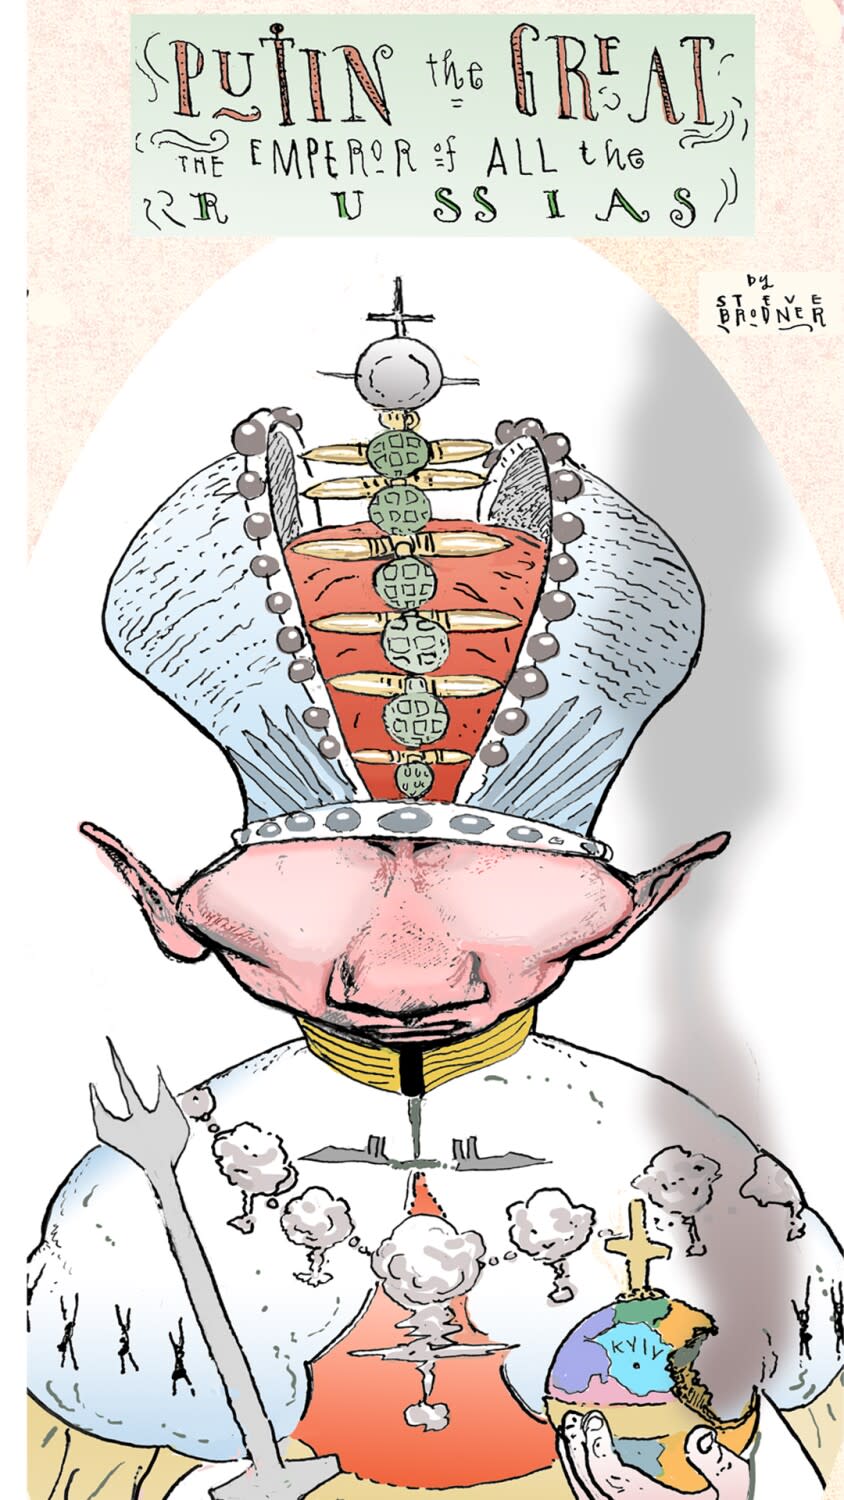 Political cartoon showing a caricature of Vladimir Putin wearing a large crown made of weaponry